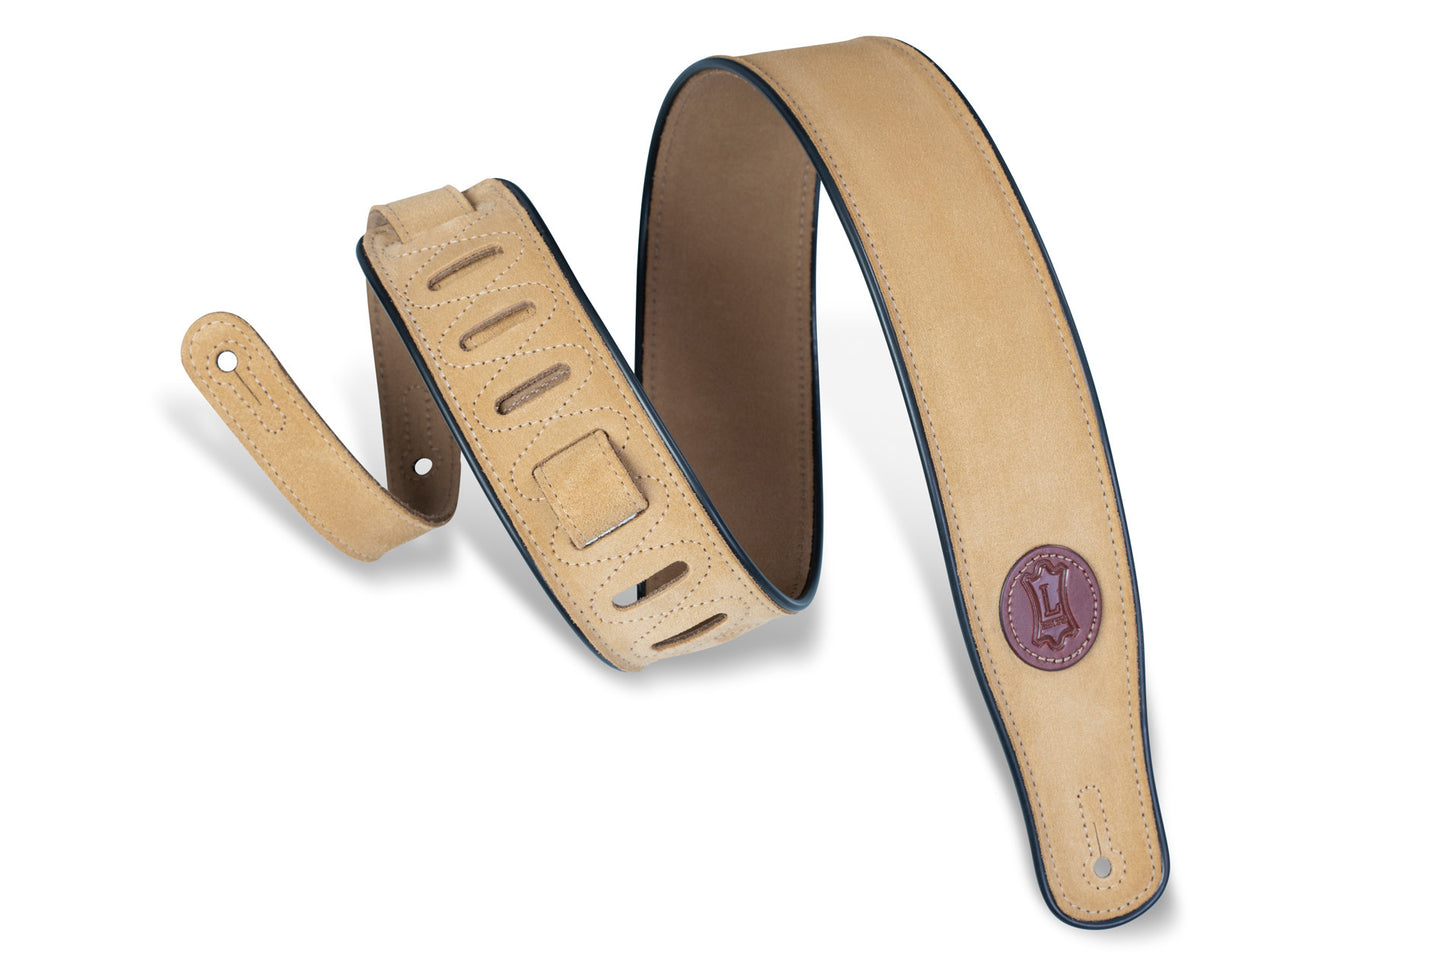 Levy's Leathers - MSS3-TAN - 2 1/2" Tan Suede Guitar Strap